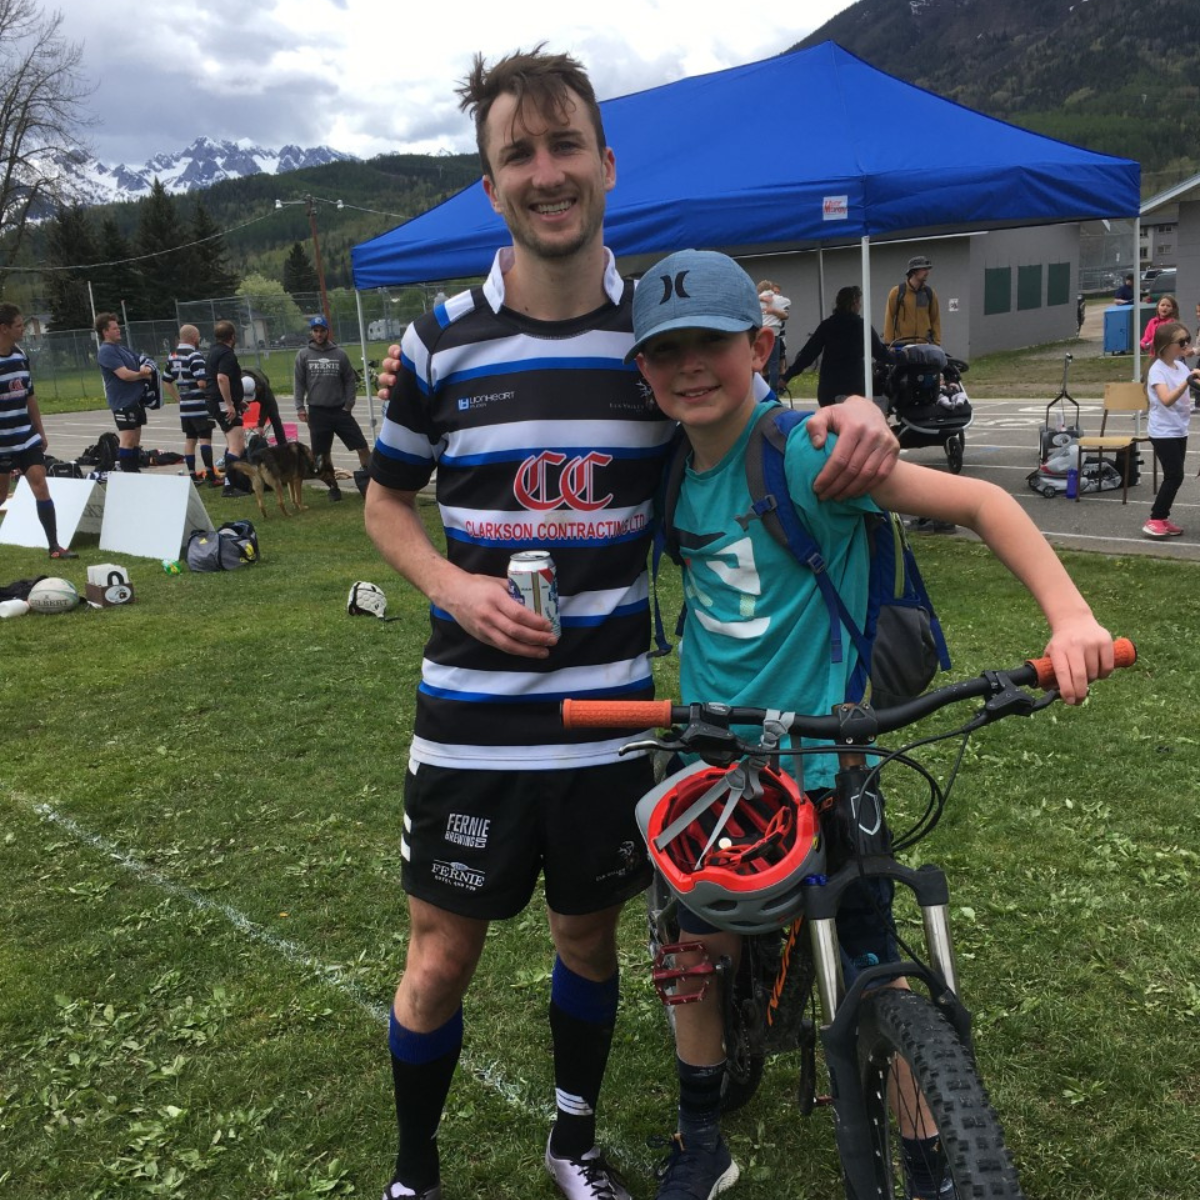 Elk Valley Bulls captain Sorla poses with a young boy on a bicycle on the side of a Rugby pitch